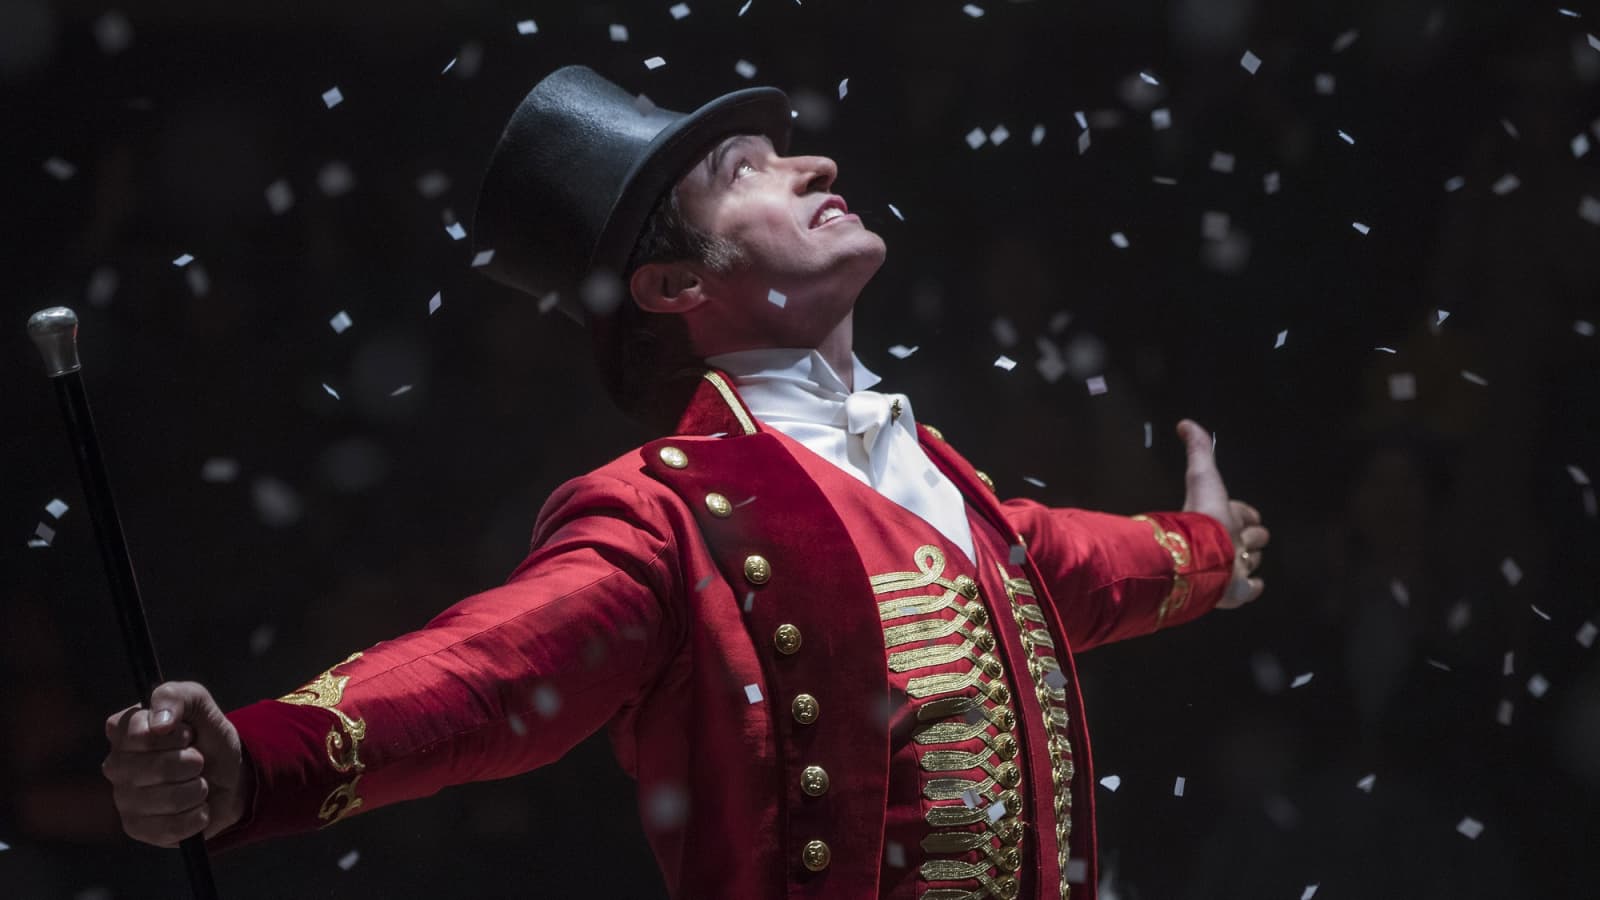 Lessons on success from P.T. Barnum, 'The Greatest Showman'